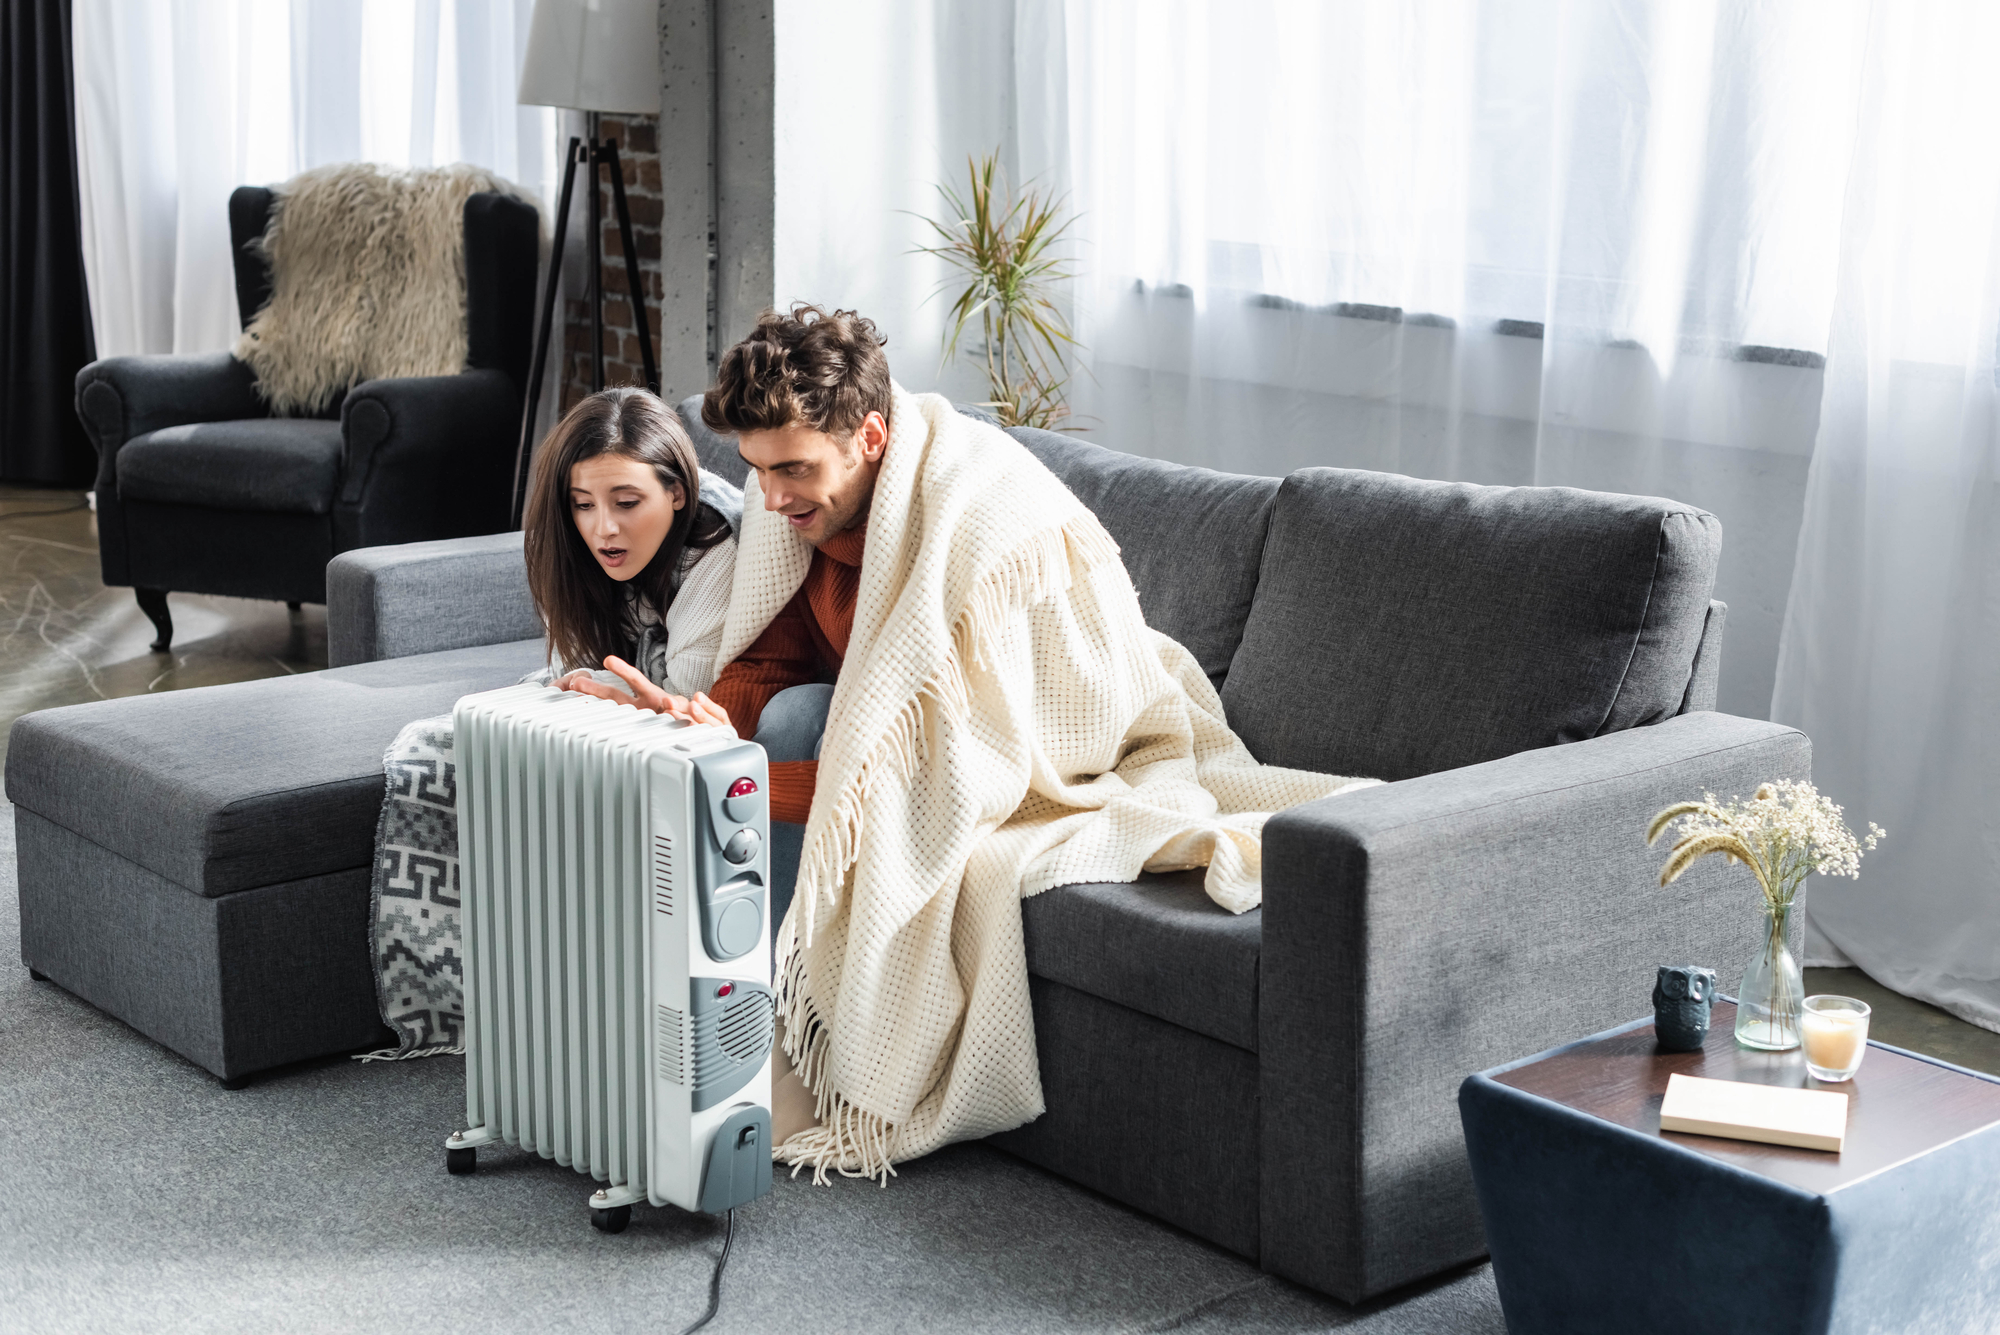 The couple warms up from an electric heater